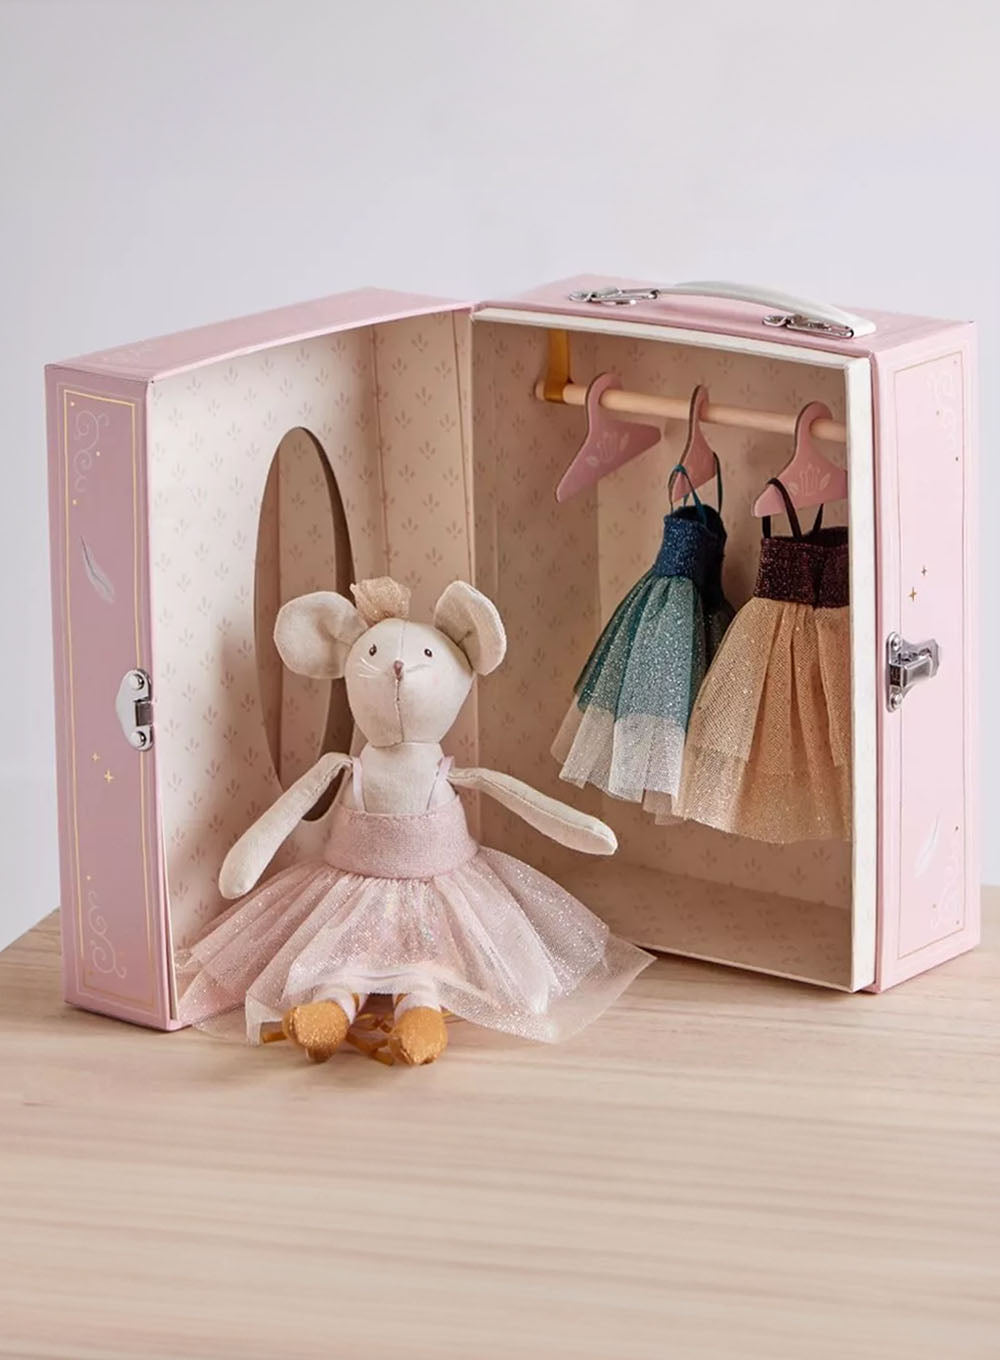 Moulin Roty Le Danse Ballerina Mouse with a Suitcase – Trotters